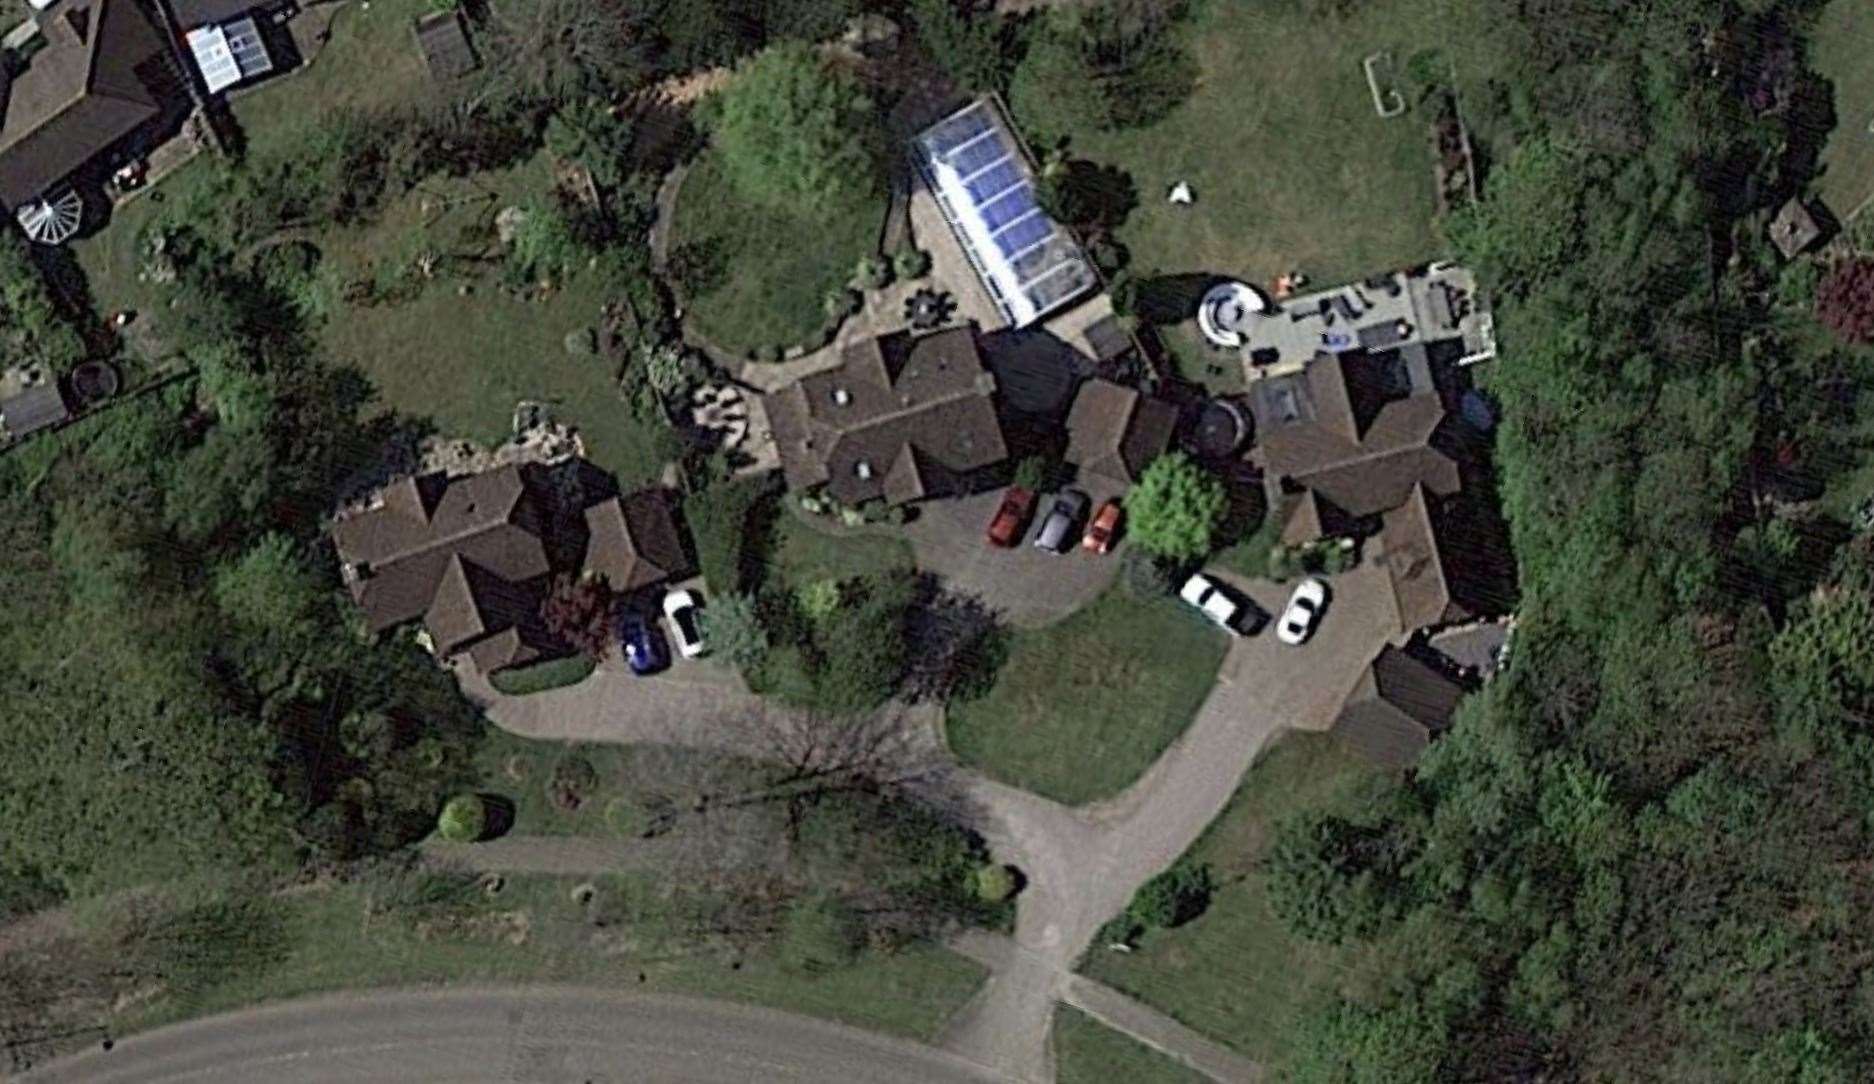 One house in Forrest Way sold in 1996 for £280,000, it is now estimated to be worth over £1.6M. Photo: Google Earth